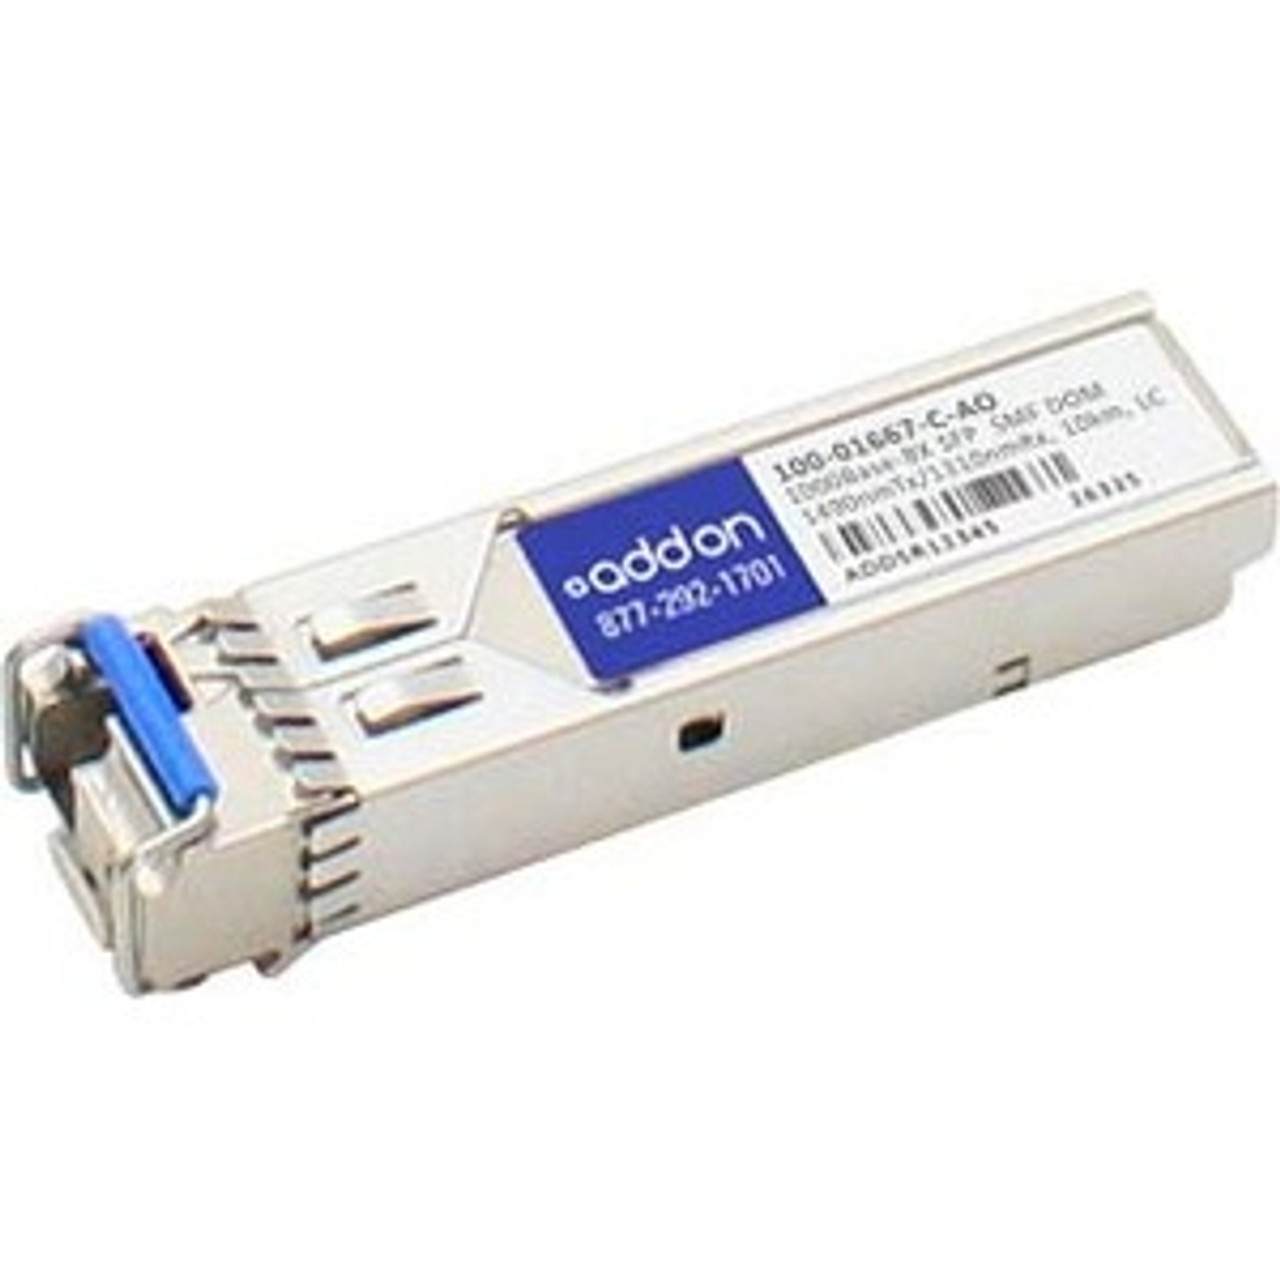 100-01667-C-AO AddOn 1.25Gbps 1000Base-BX-D Single-mode Fiber 10km 1550nmTX/1310nmRX LC Connector SFP Transceiver Module for Calix Compatible